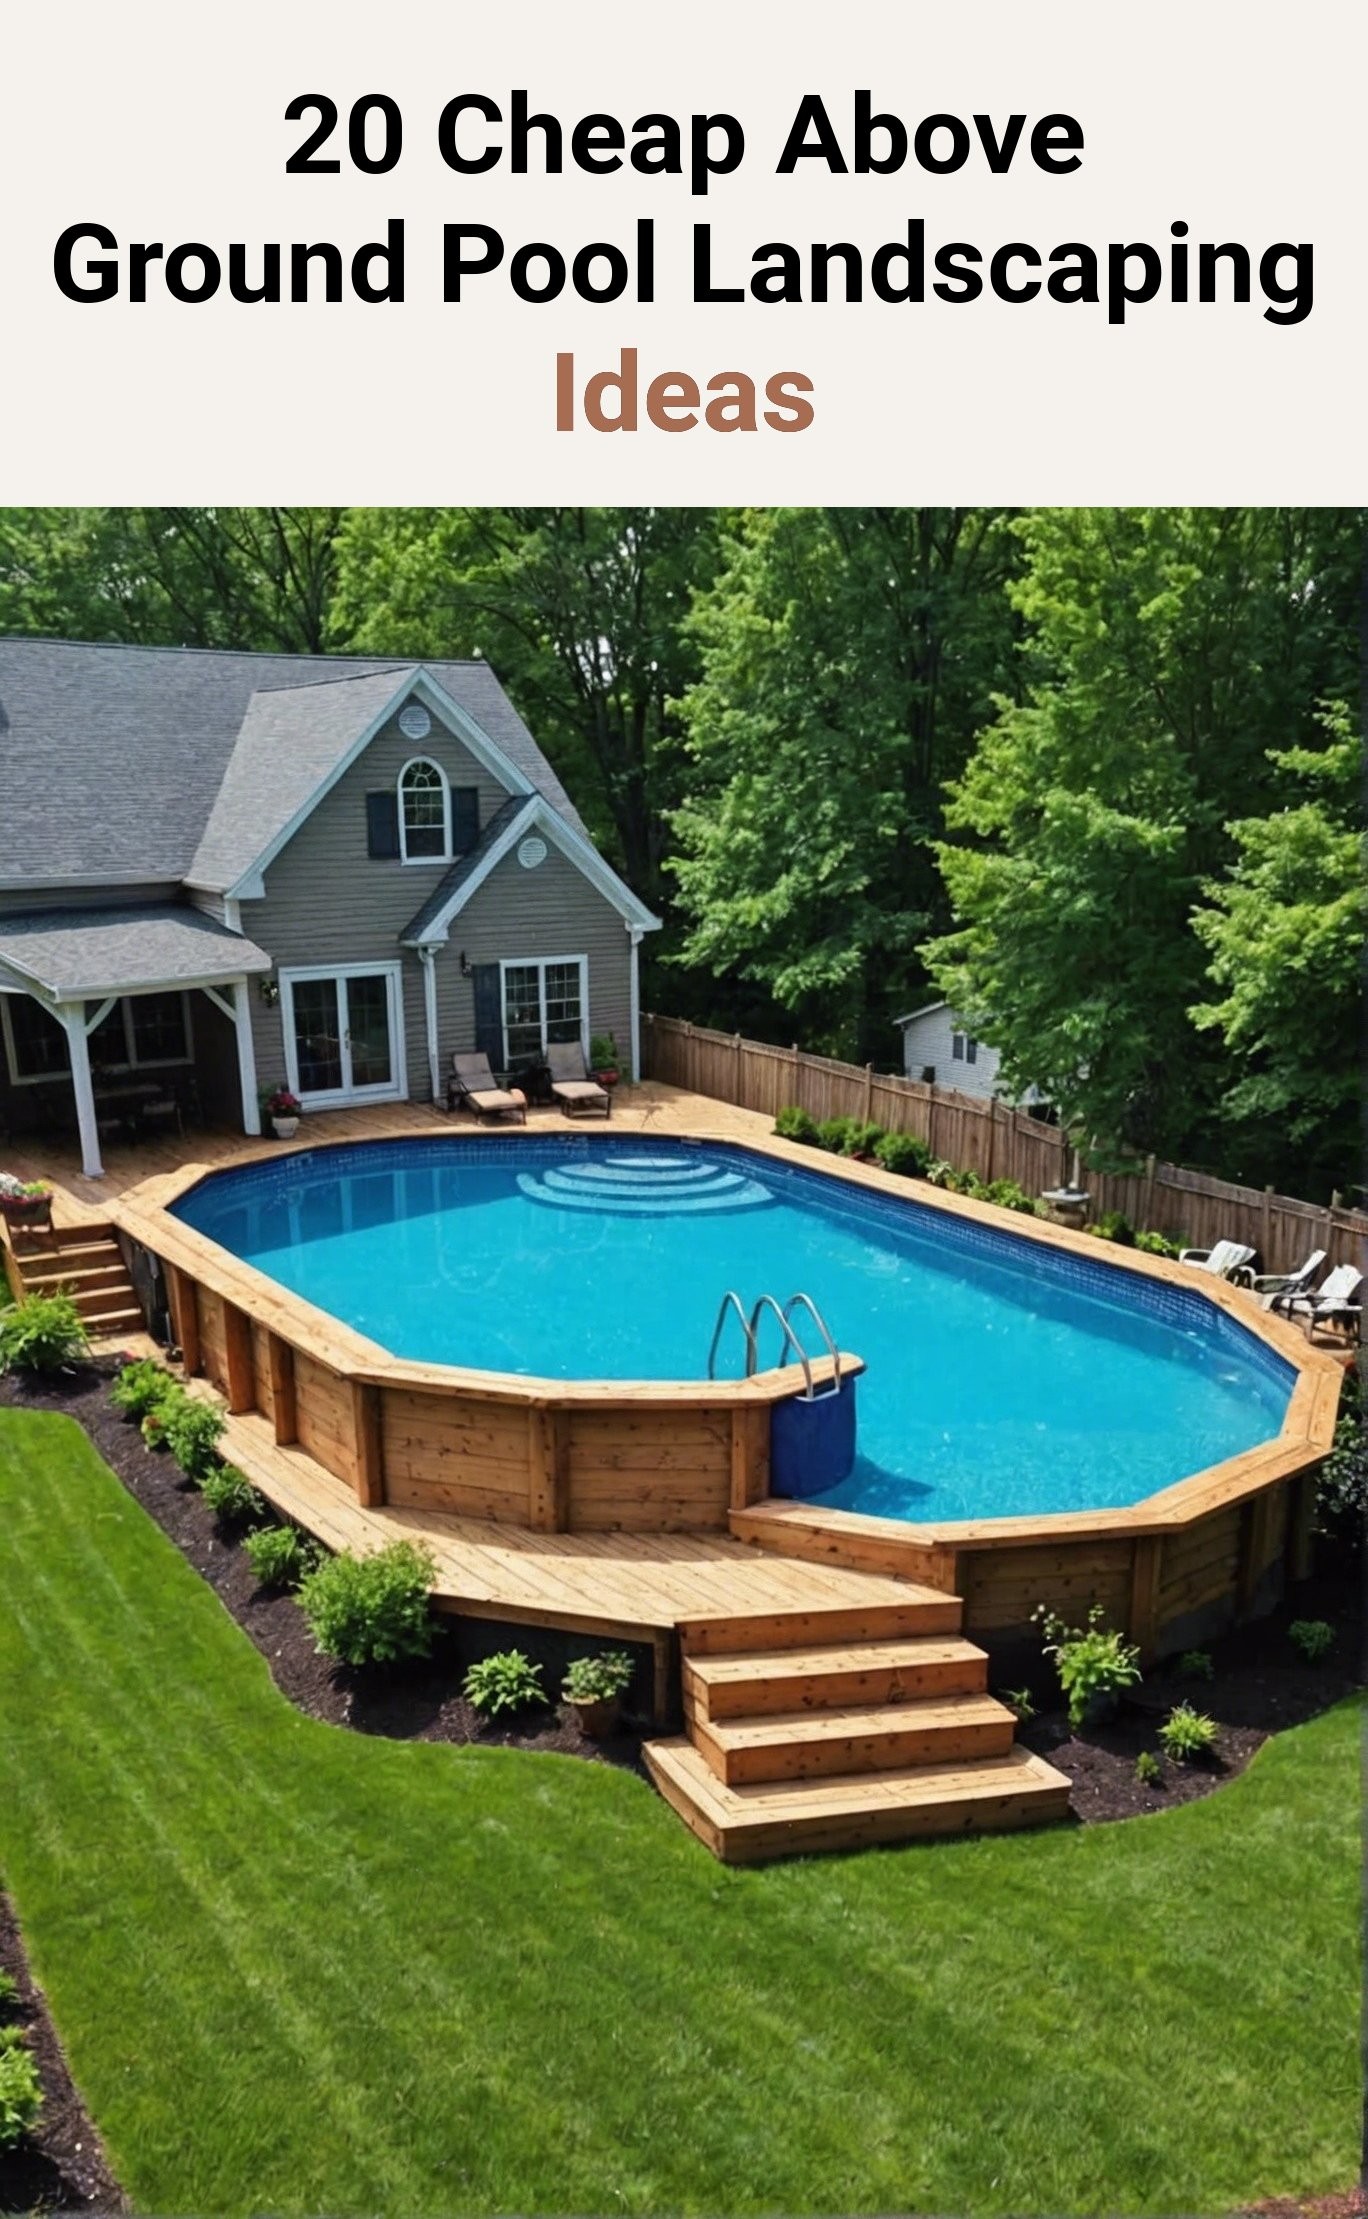 20 Cheap Above Ground Pool Landscaping Ideas